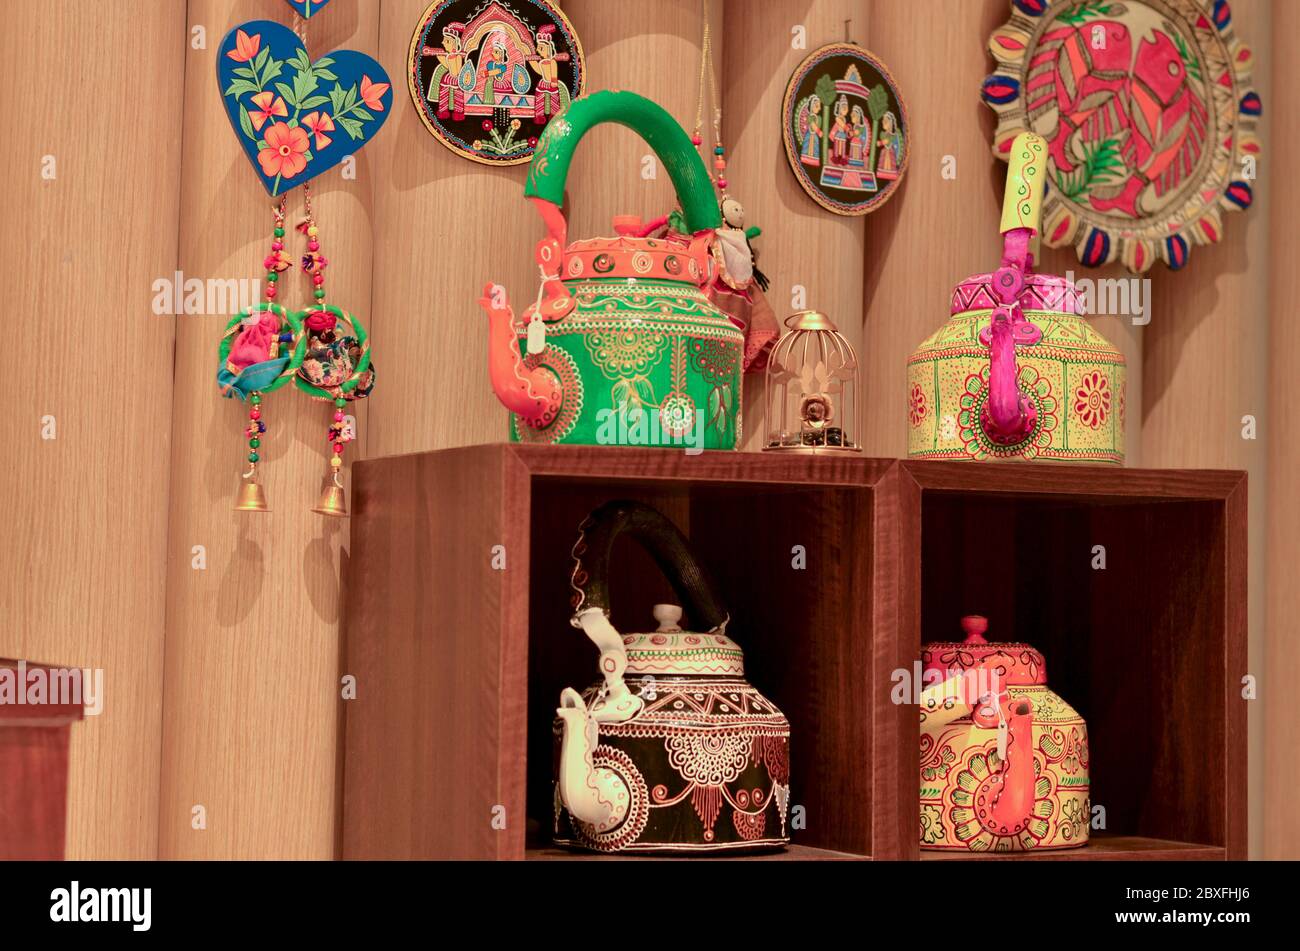 Painted colorful decorative traditional Indian kettles, dreamcatchers and wind chimes on display in a retail store in Dilli Haat, New Delhi, India Stock Photo